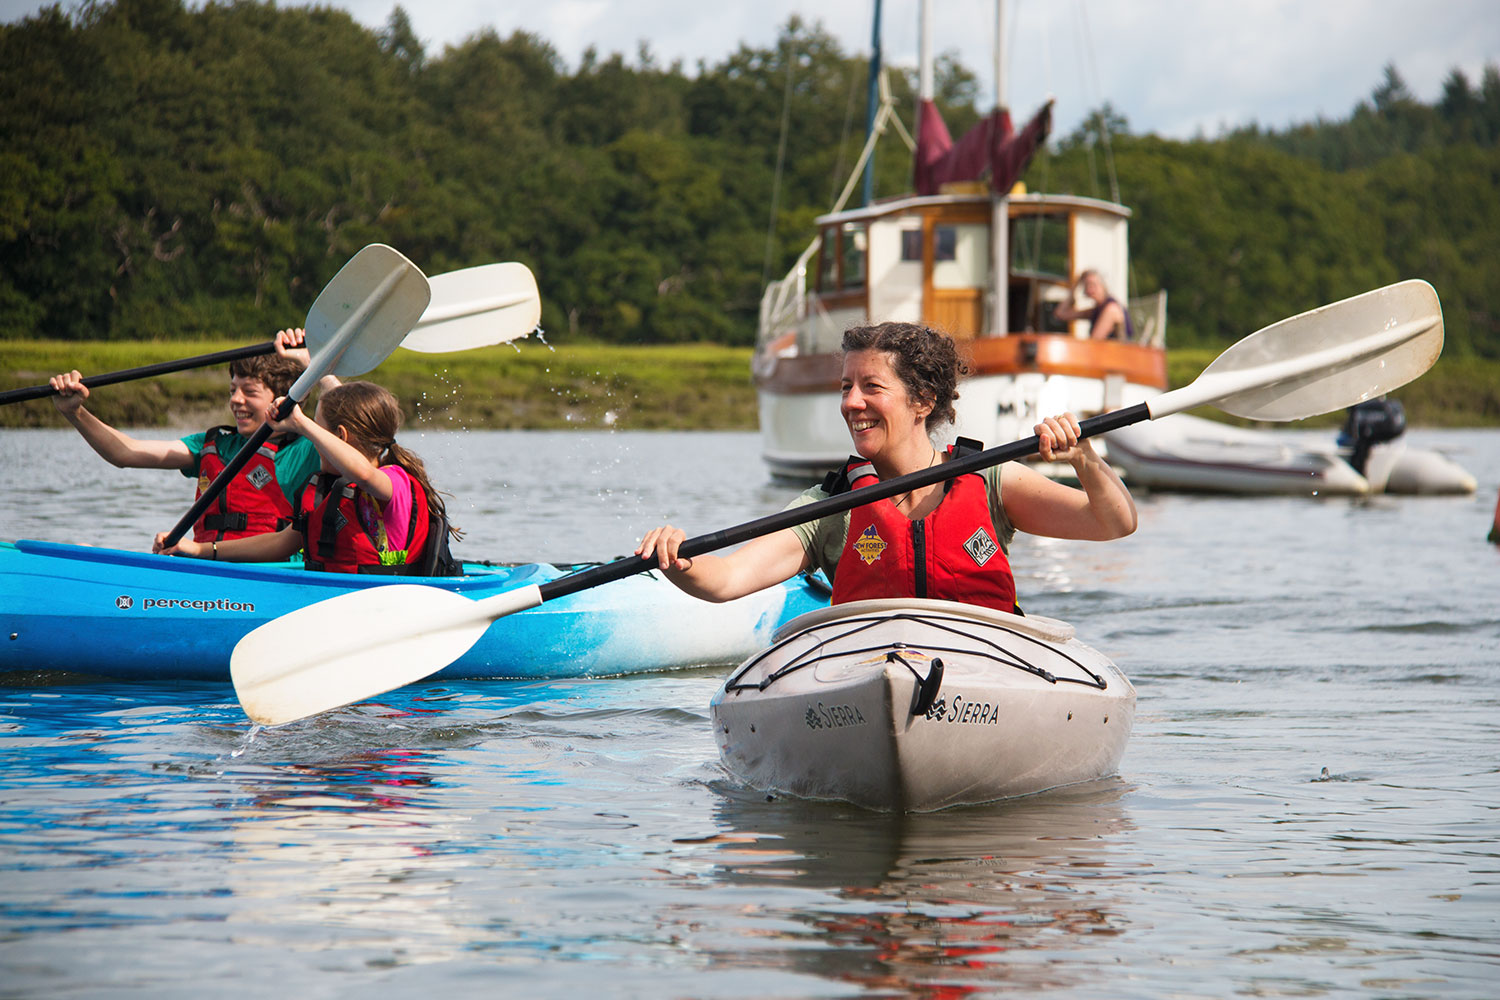 A family kayaking together on the Beaulieu River